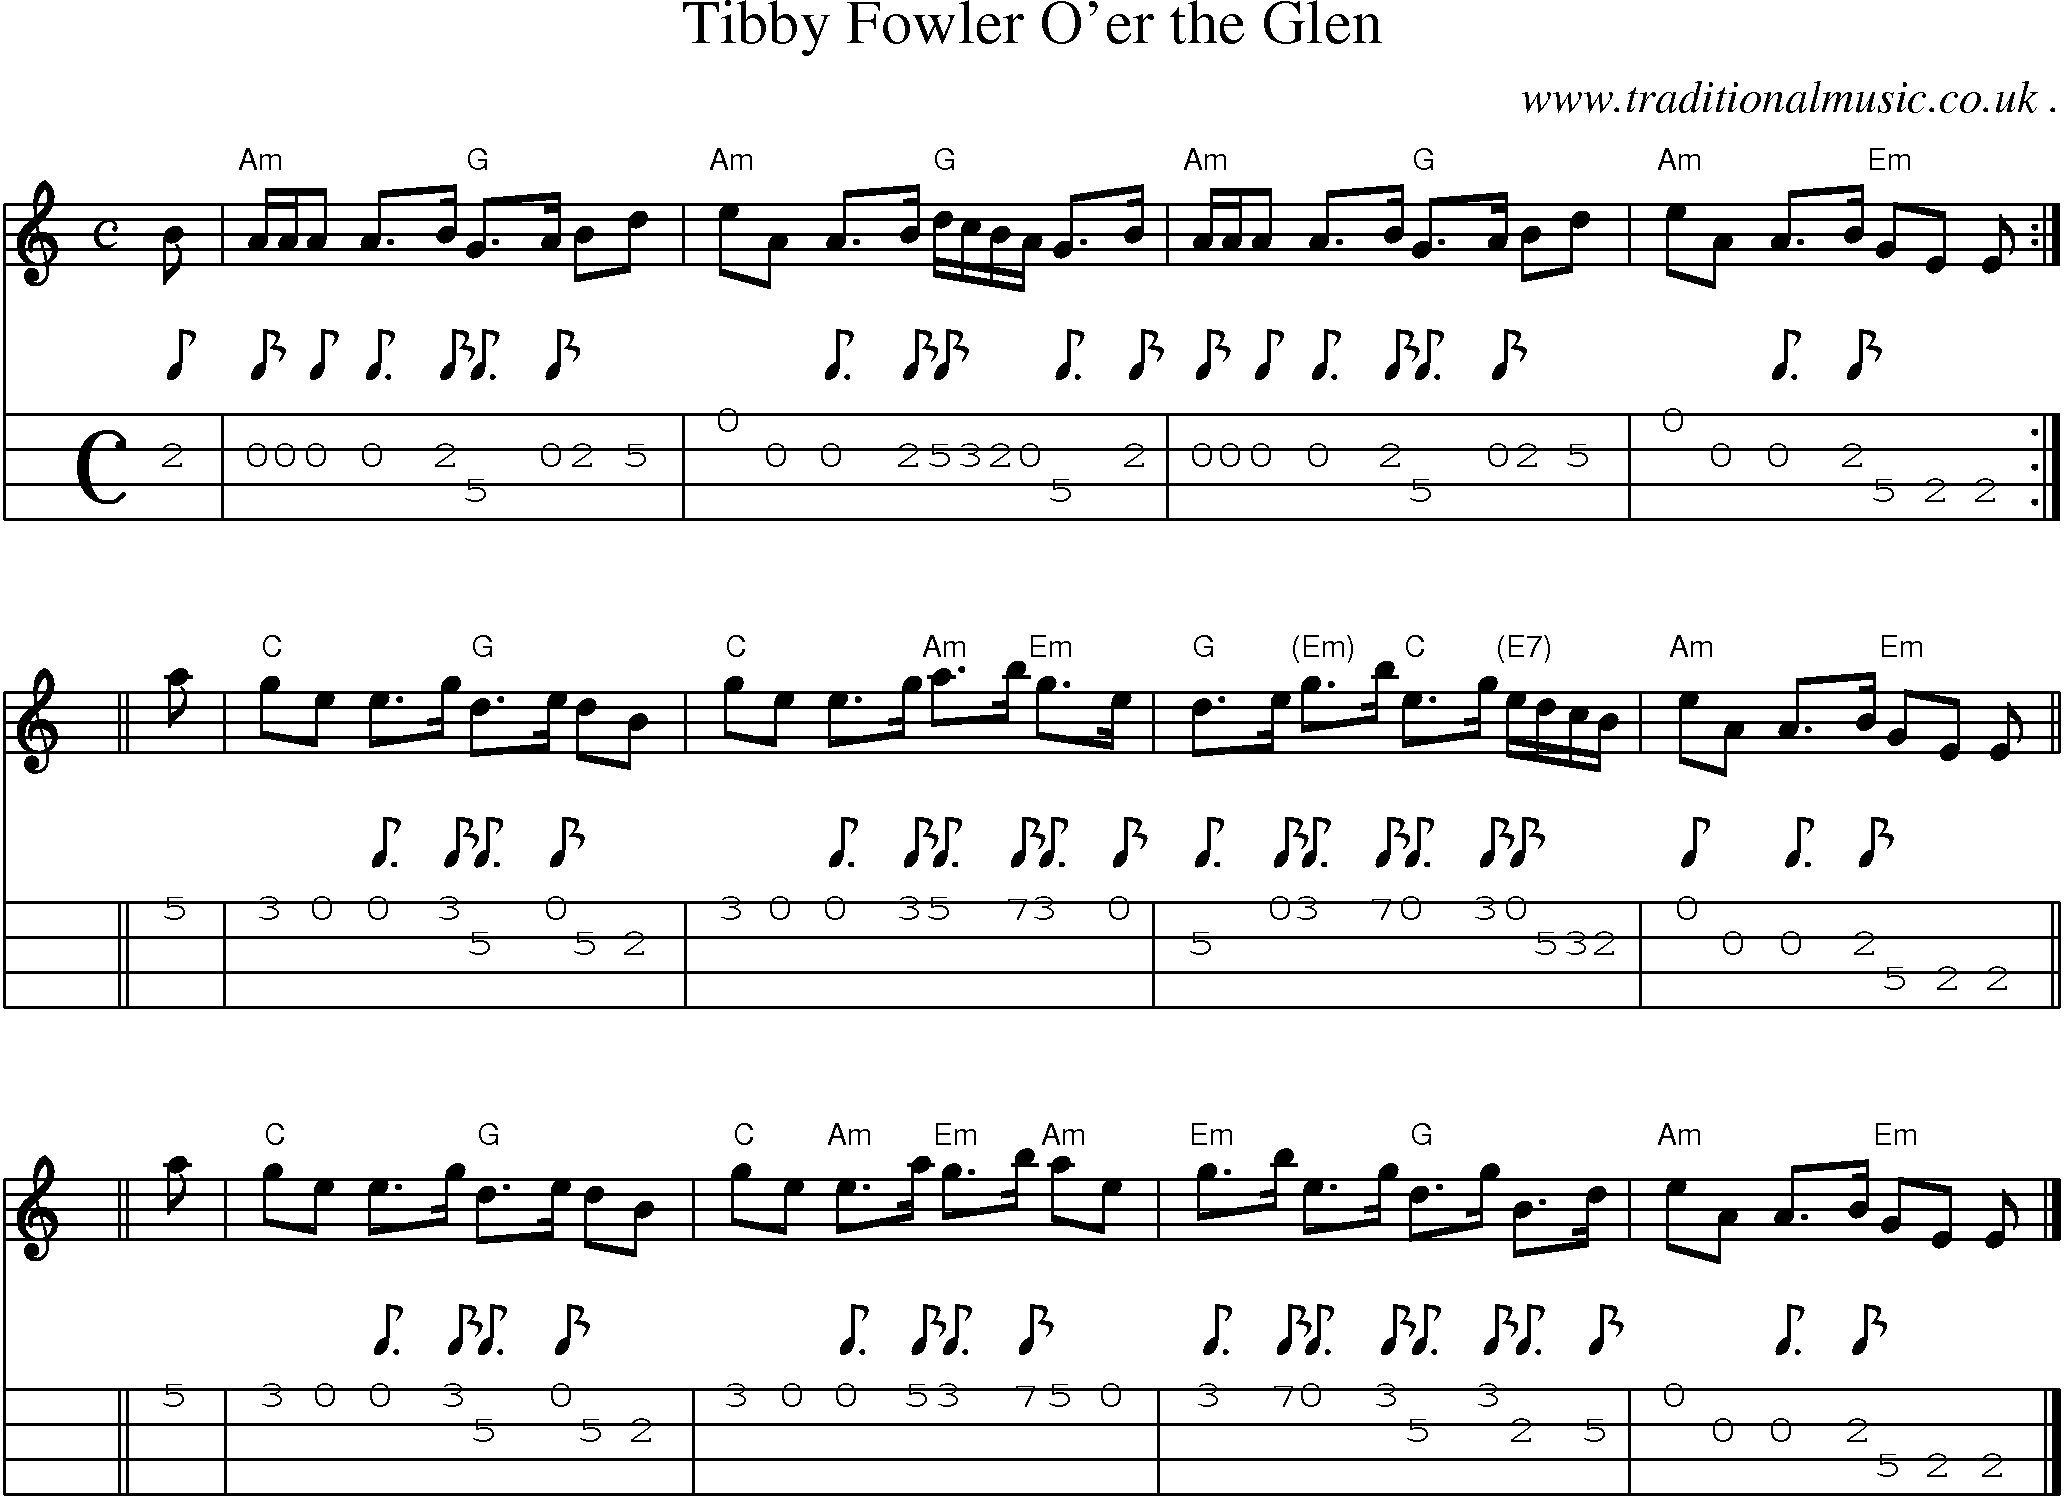 Sheet-music  score, Chords and Mandolin Tabs for Tibby Fowler Oer The Glen